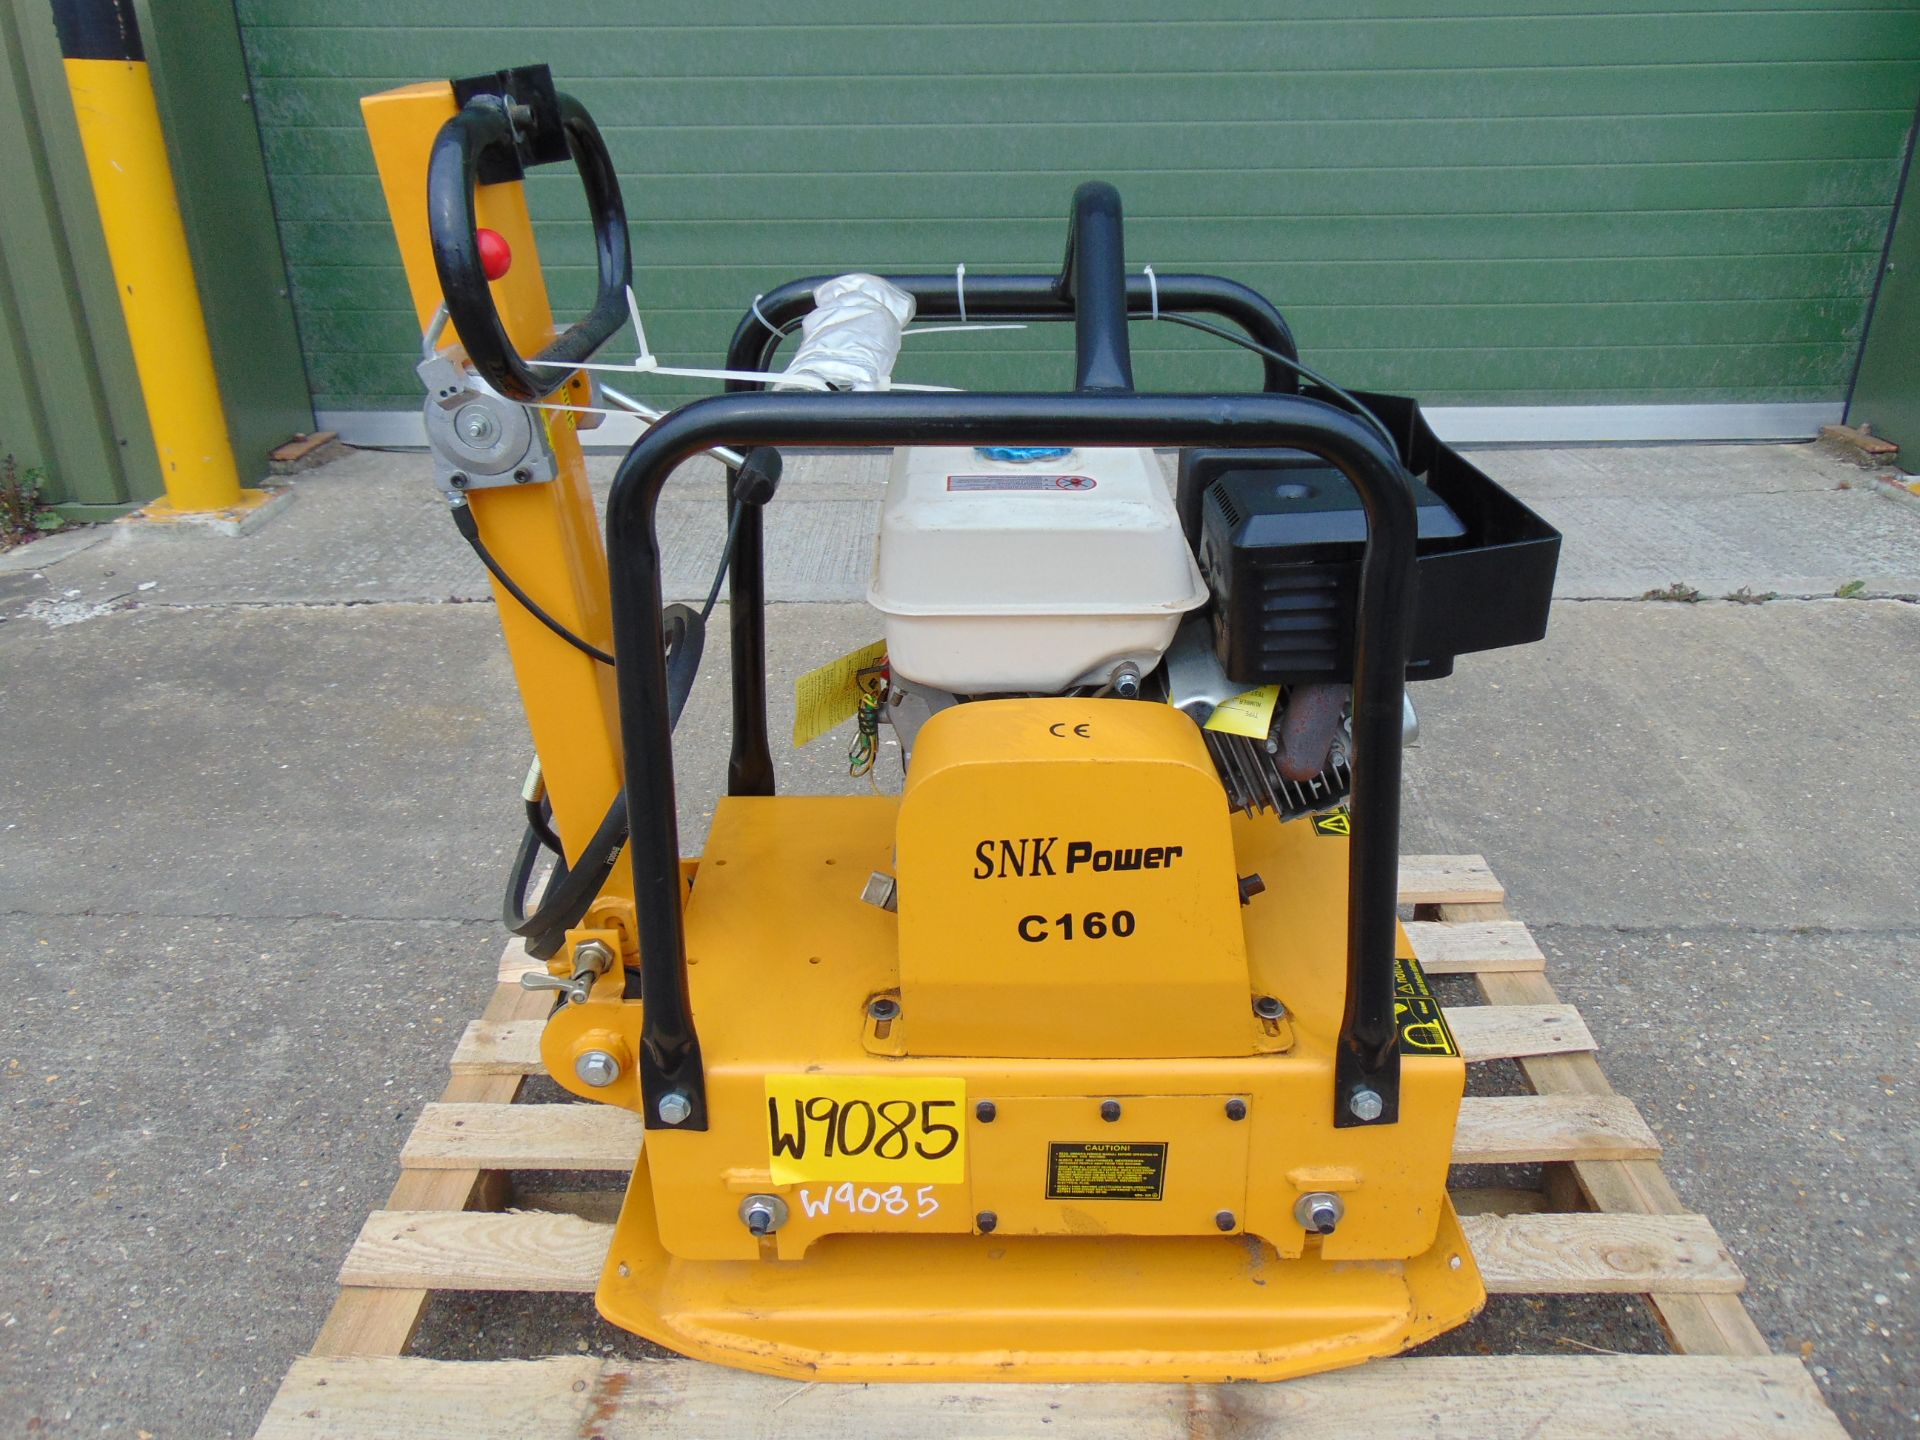 New & Unused SNK Power C160 Petrol Powered Compaction Wacker Plate - Image 3 of 10